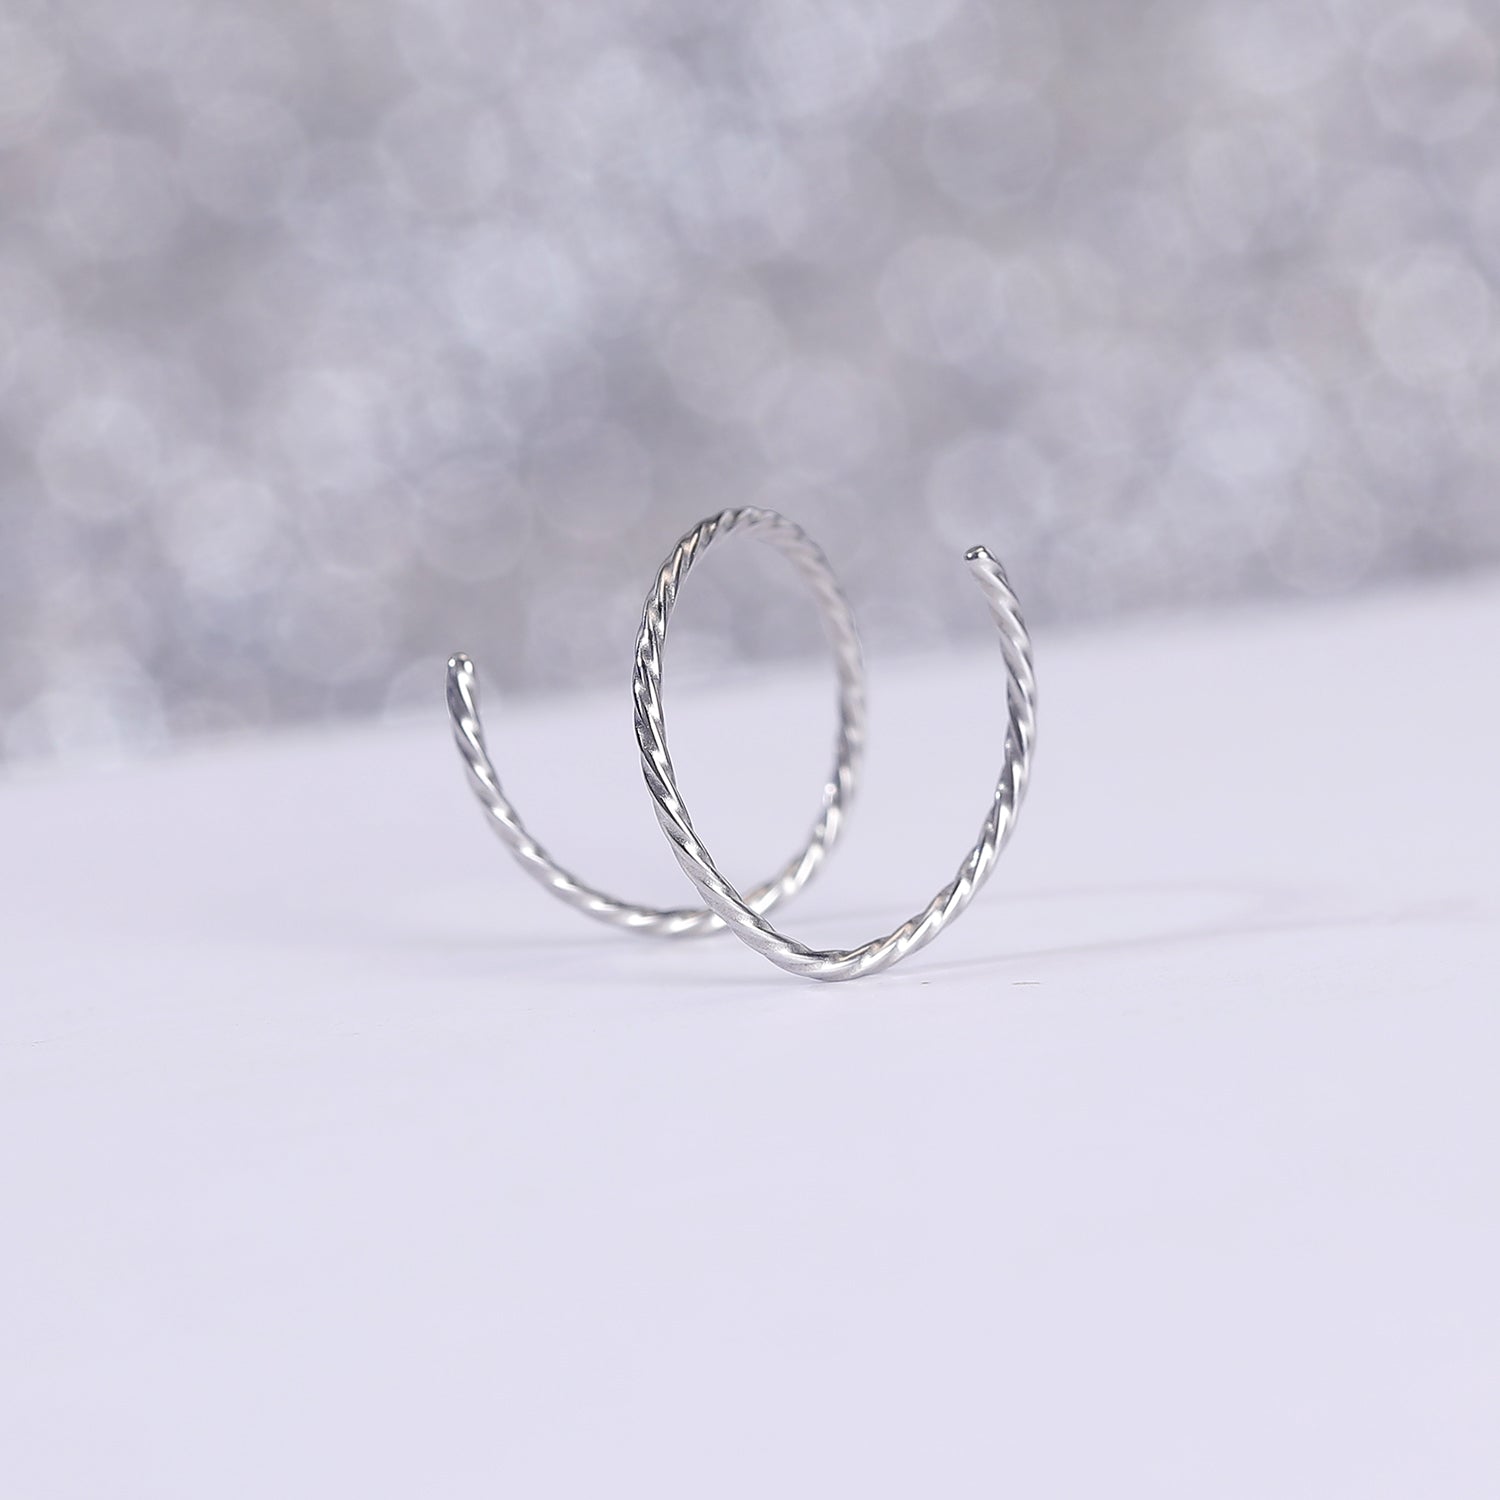 16g-sprial-clicker-nose-ring-double-ring-cartilage-helix-piercing